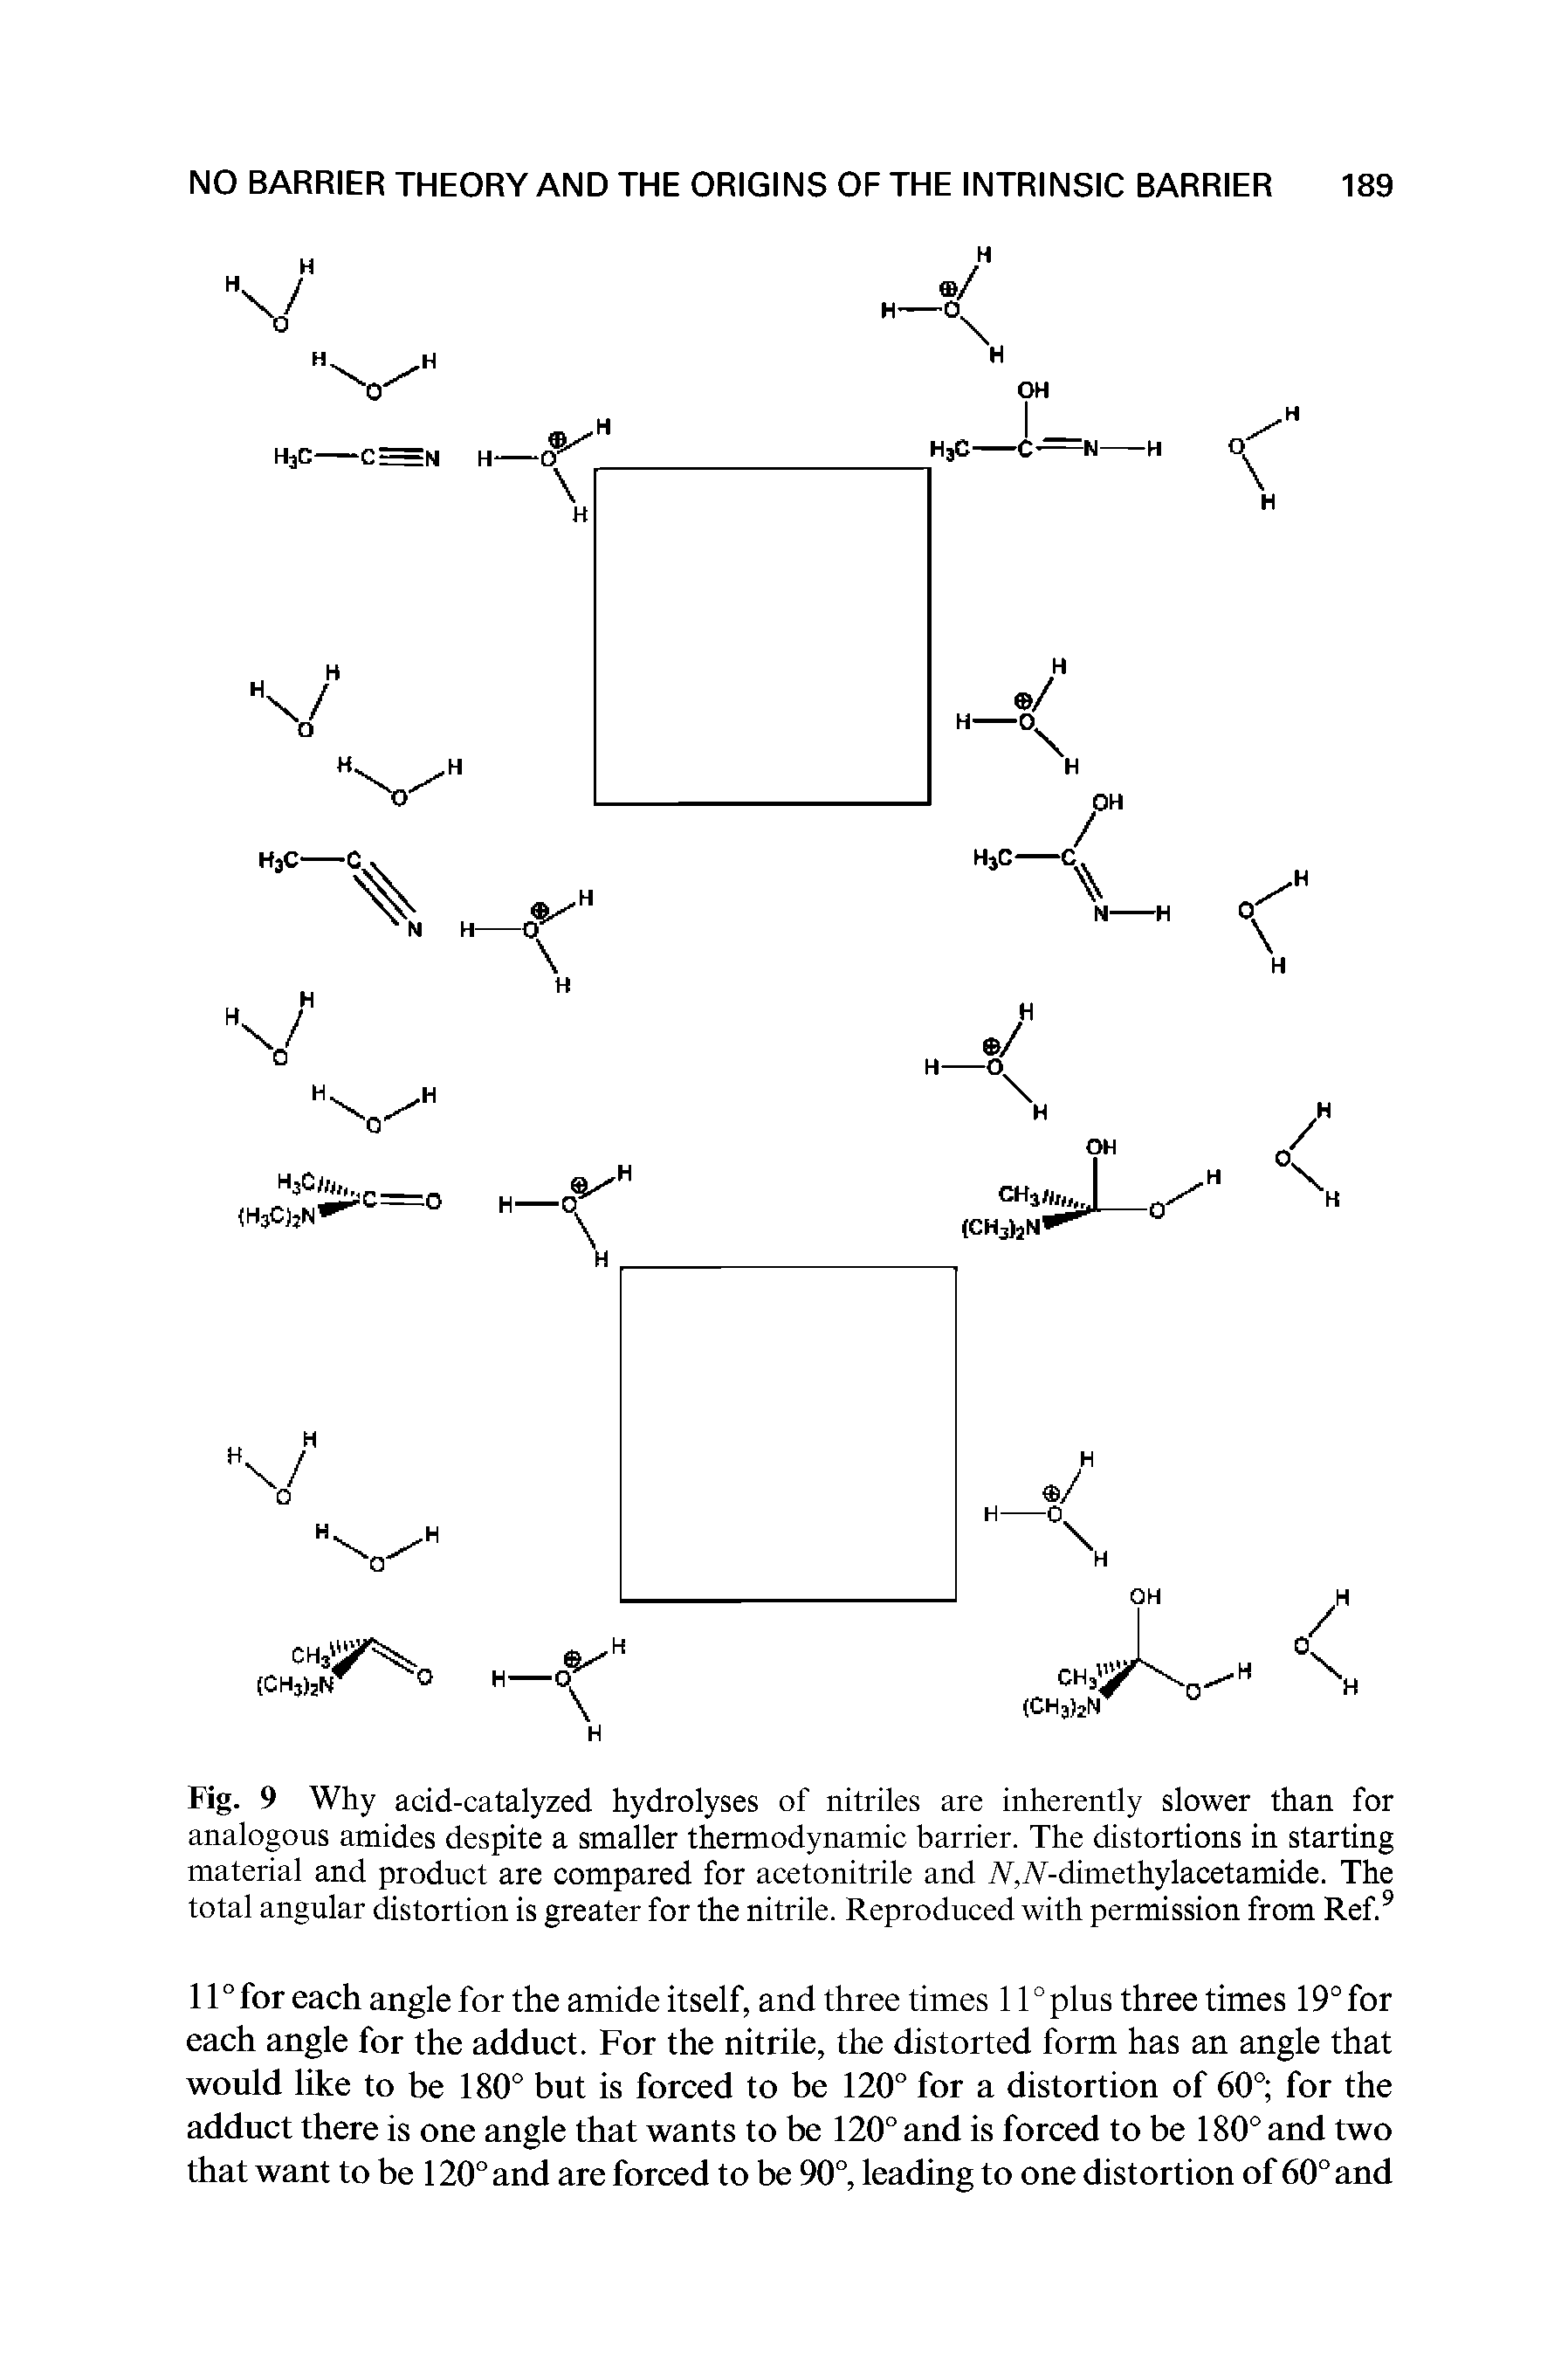 Fig. 9 Why acid-catalyzed hydrolyses of nitriles are inherently slower than for analogous amides despite a smaller thermodynamic barrier. The distortions in starting material and product are compared for acetonitrile and iVW-dimethylacetamide. The total angular distortion is greater for the nitrile. Reproduced with permission from Ref.9...